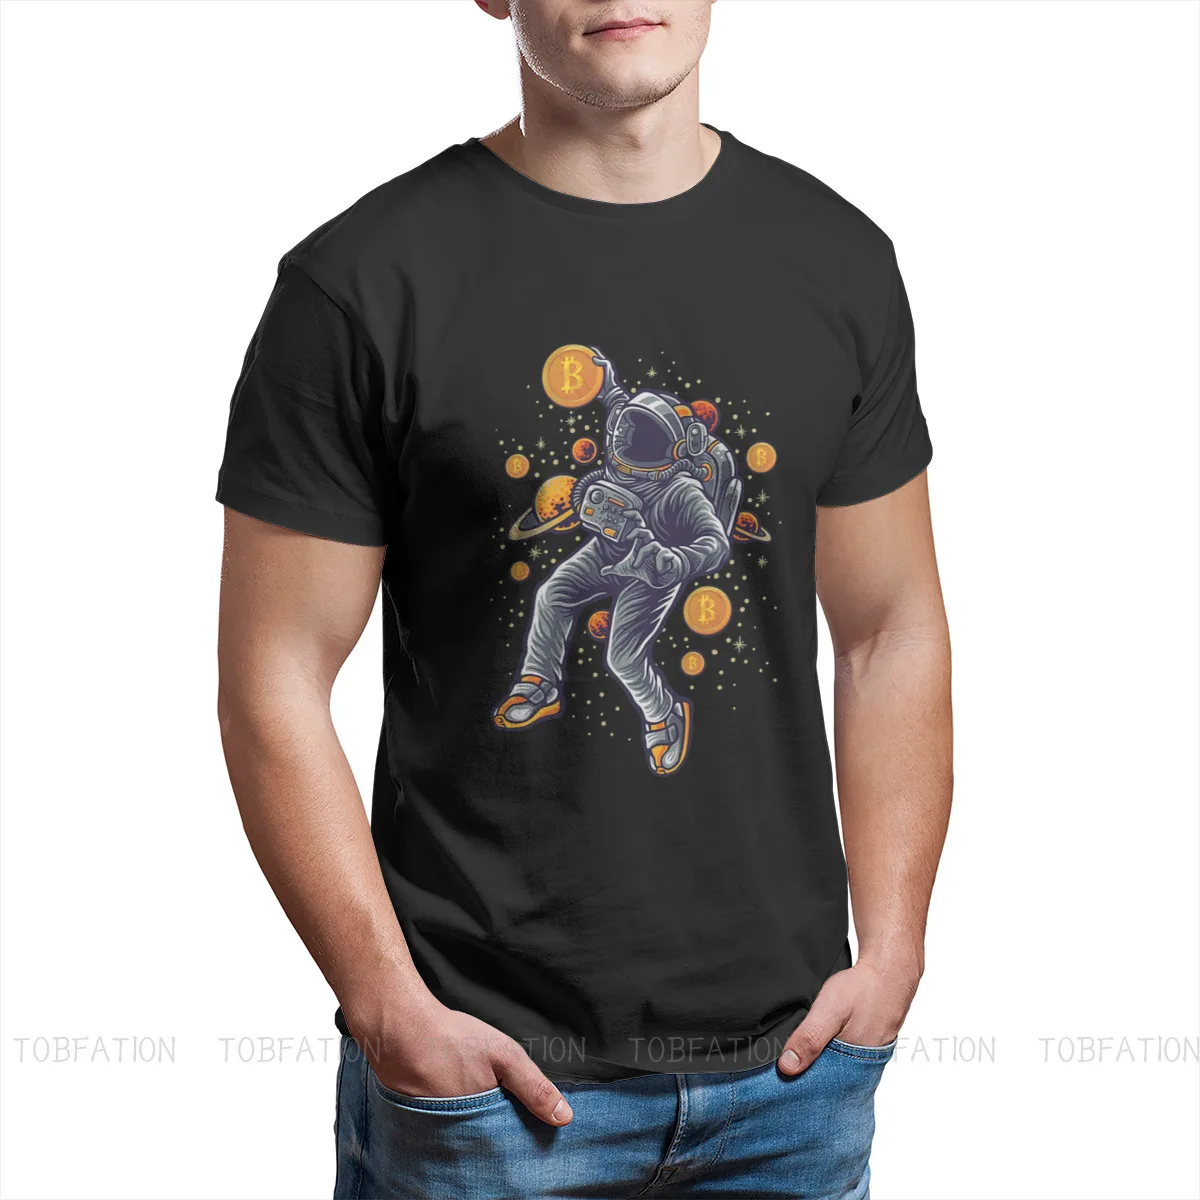 

BTC Crypto Basketball in Space Unique TShirt Bitcoin Cryptocurrency Miners Meme Comfortable Gift Idea T Shirt Stuff Hot Sale